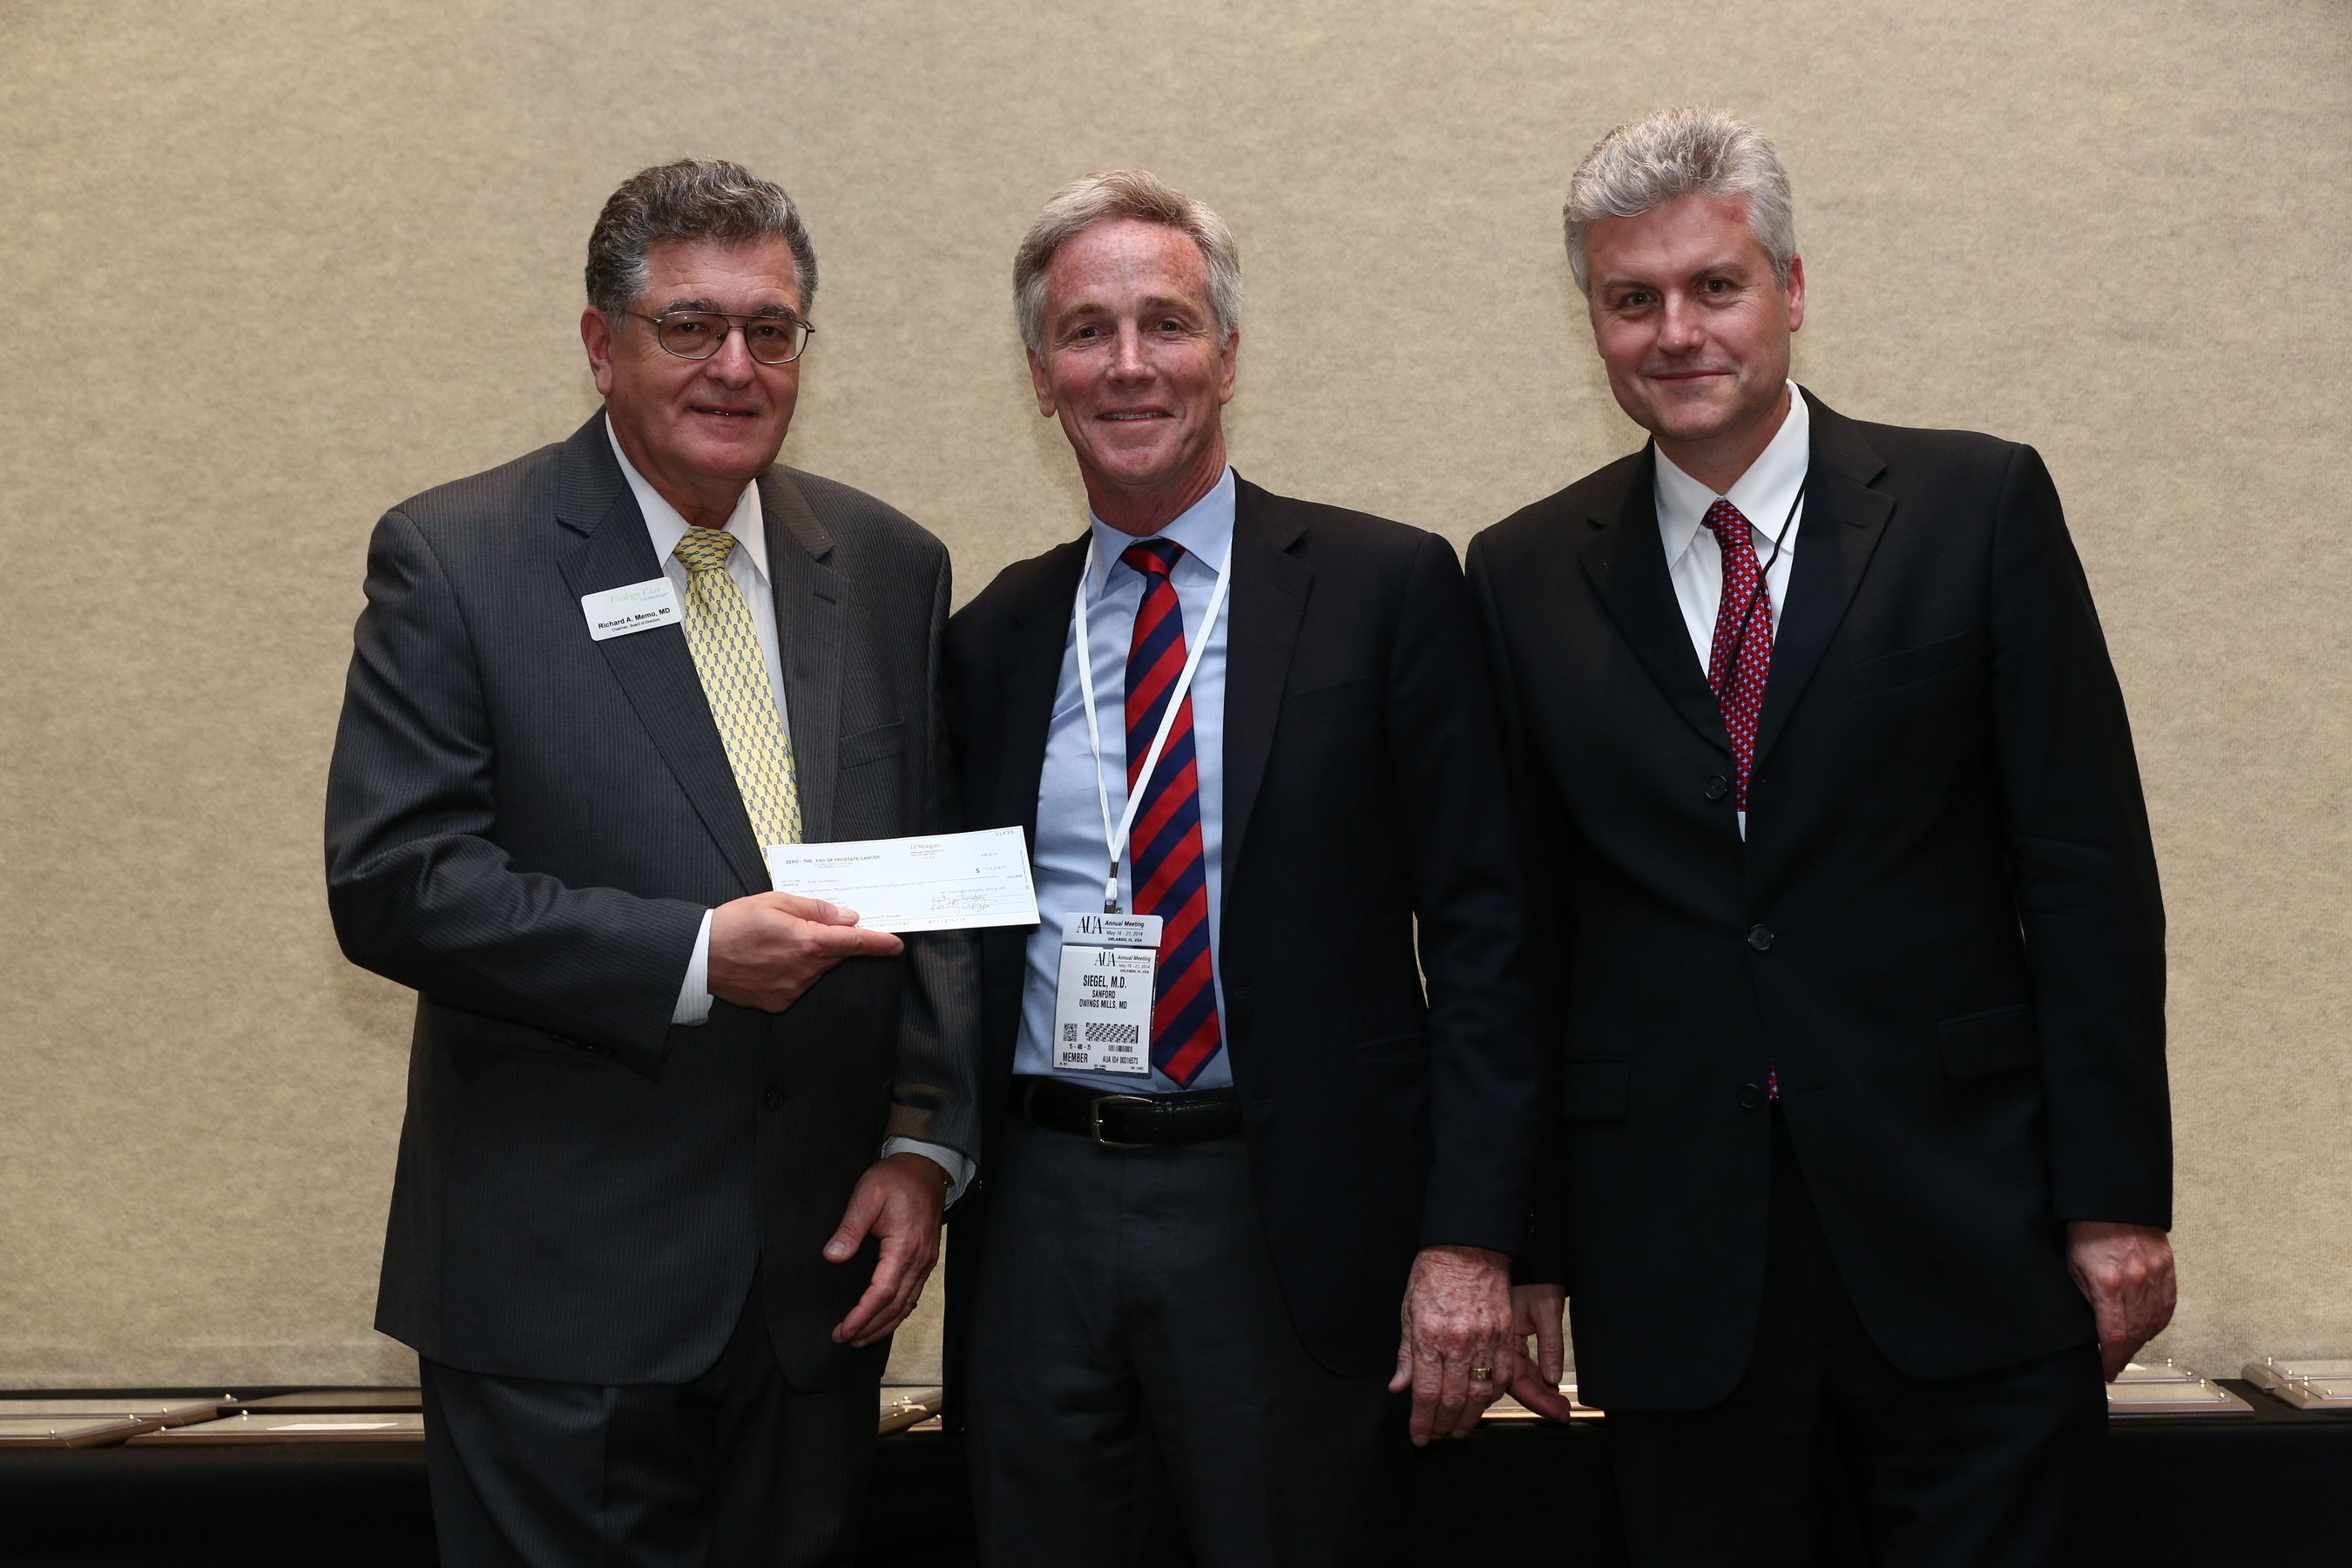 Dr. Richard Memo, Chair of Urology Care Foundation Board of Directors (left), Dr. Sanford Siegel, President and CEO, Chesapeake Urology Associates (center), and Dr. Johannes Vieweg, AUA Research Council Chair (right). (PRNewsFoto/Chesapeake Urology Associates)